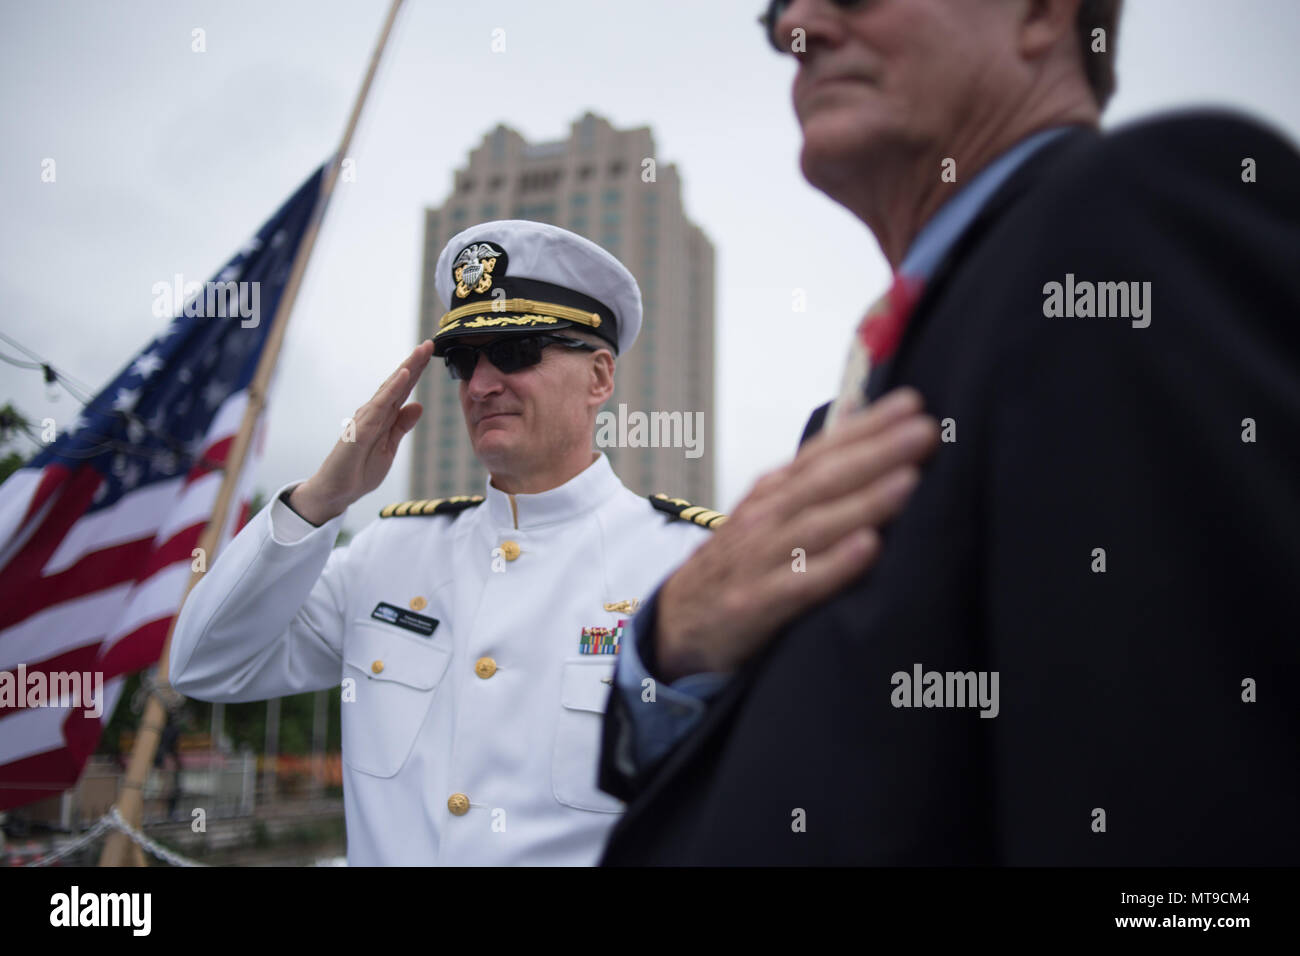 Philadelphia, United States. 28th May, 2018. USN Capt. Francis Spencer salutes while 'Taps' is played during the Memorial Day ceremony onboard the retired USS Olympia, which carried home the remains of the Unknown Soldier interred at Arlington National Cemetery from France in 1921. Credit: Michael Candelori/Pacific Press/Alamy Live News Stock Photo